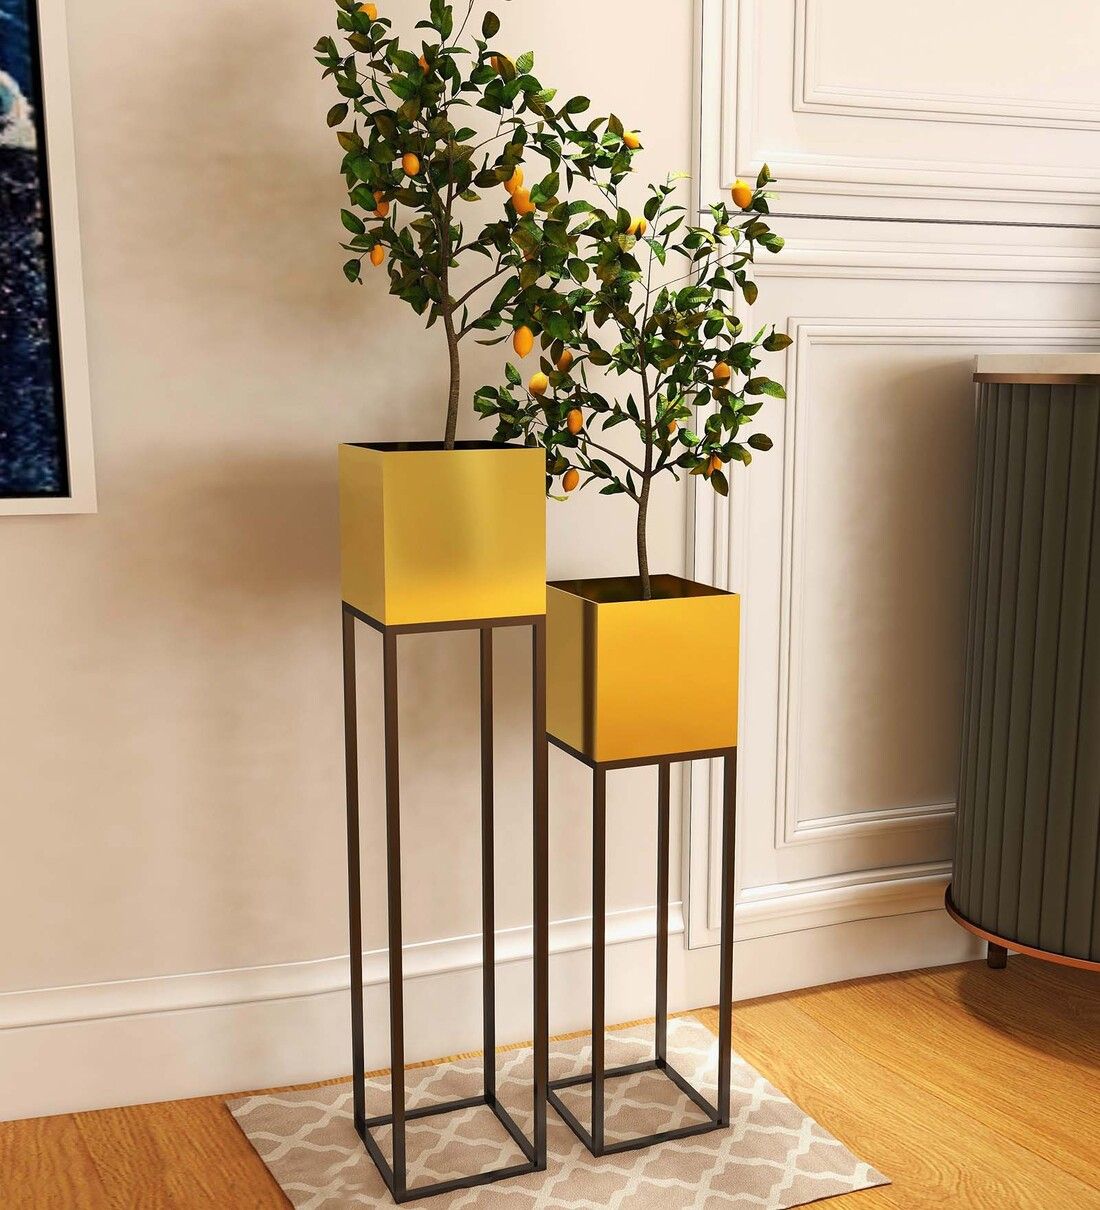 Buy Black & Gold Metal Rectangular Planter Stand, Set Of 2havanto  Online – Metal Planter Stands – Pots & Planters – Home Decor – Pepperfry  Product For Rectangular Plant Stands (View 7 of 15)